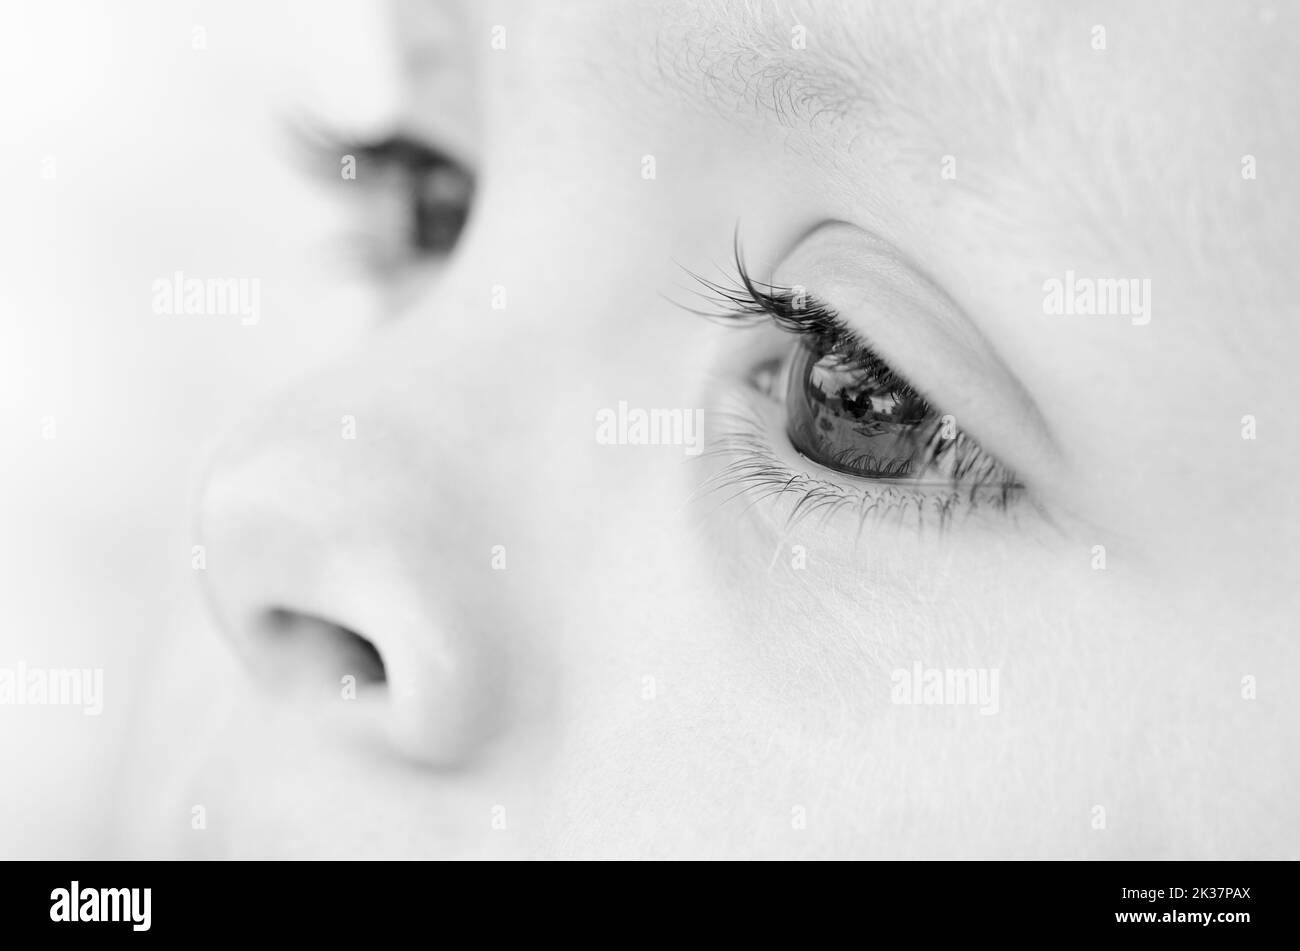 detailed image of a human eye of a small child Stock Photo